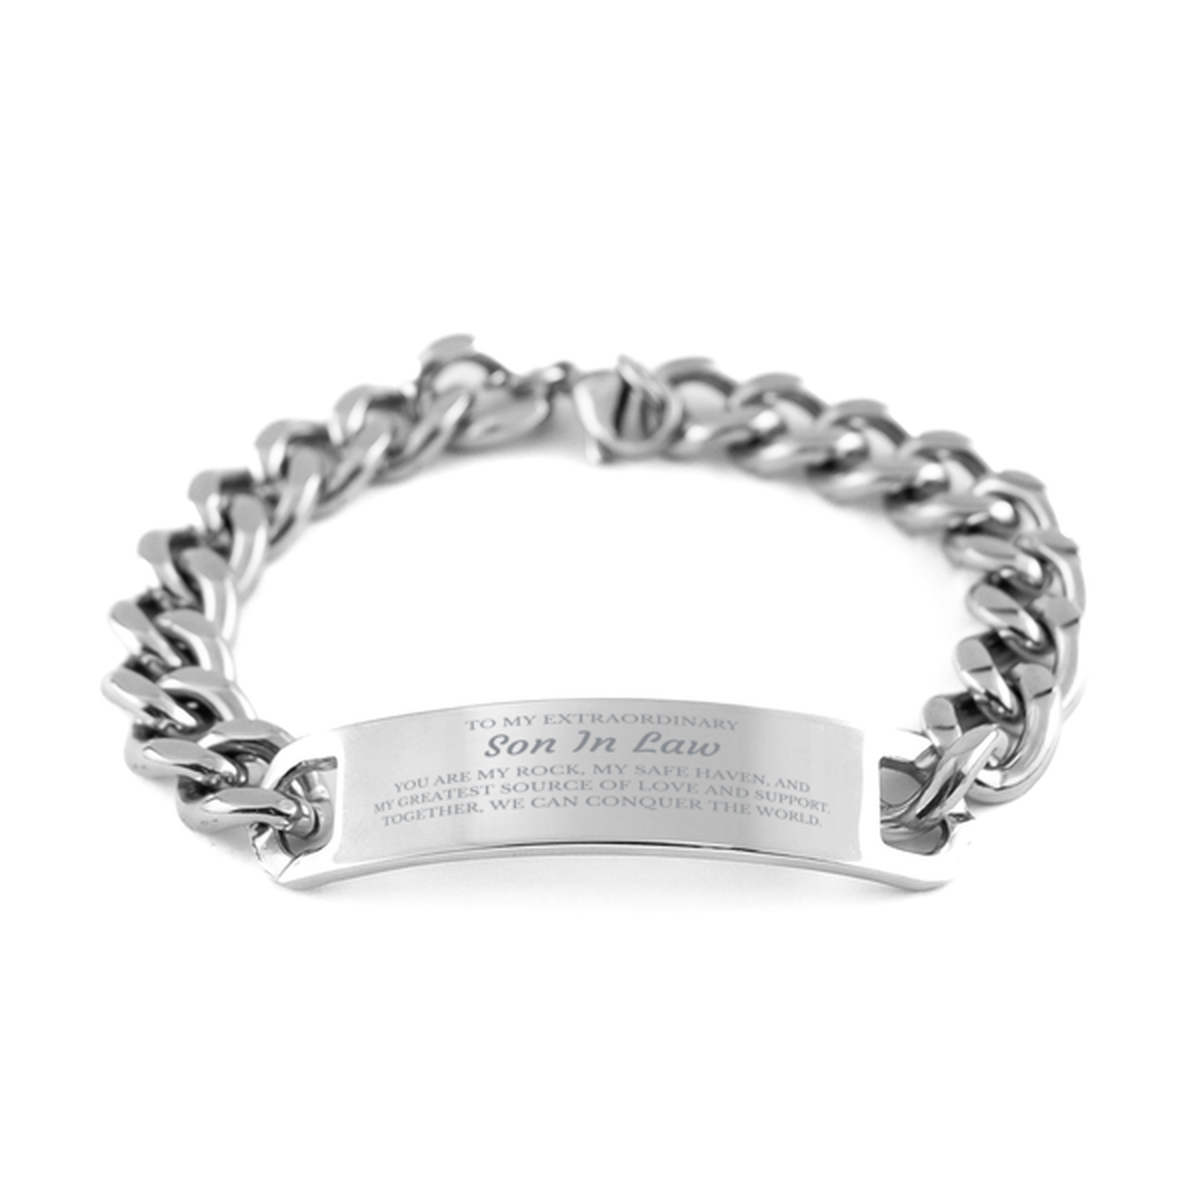 To My Extraordinary Son In Law Gifts, Together, we can conquer the world, Birthday Cuban Chain Stainless Steel Bracelet For Son In Law, Christmas Gifts For Son In Law